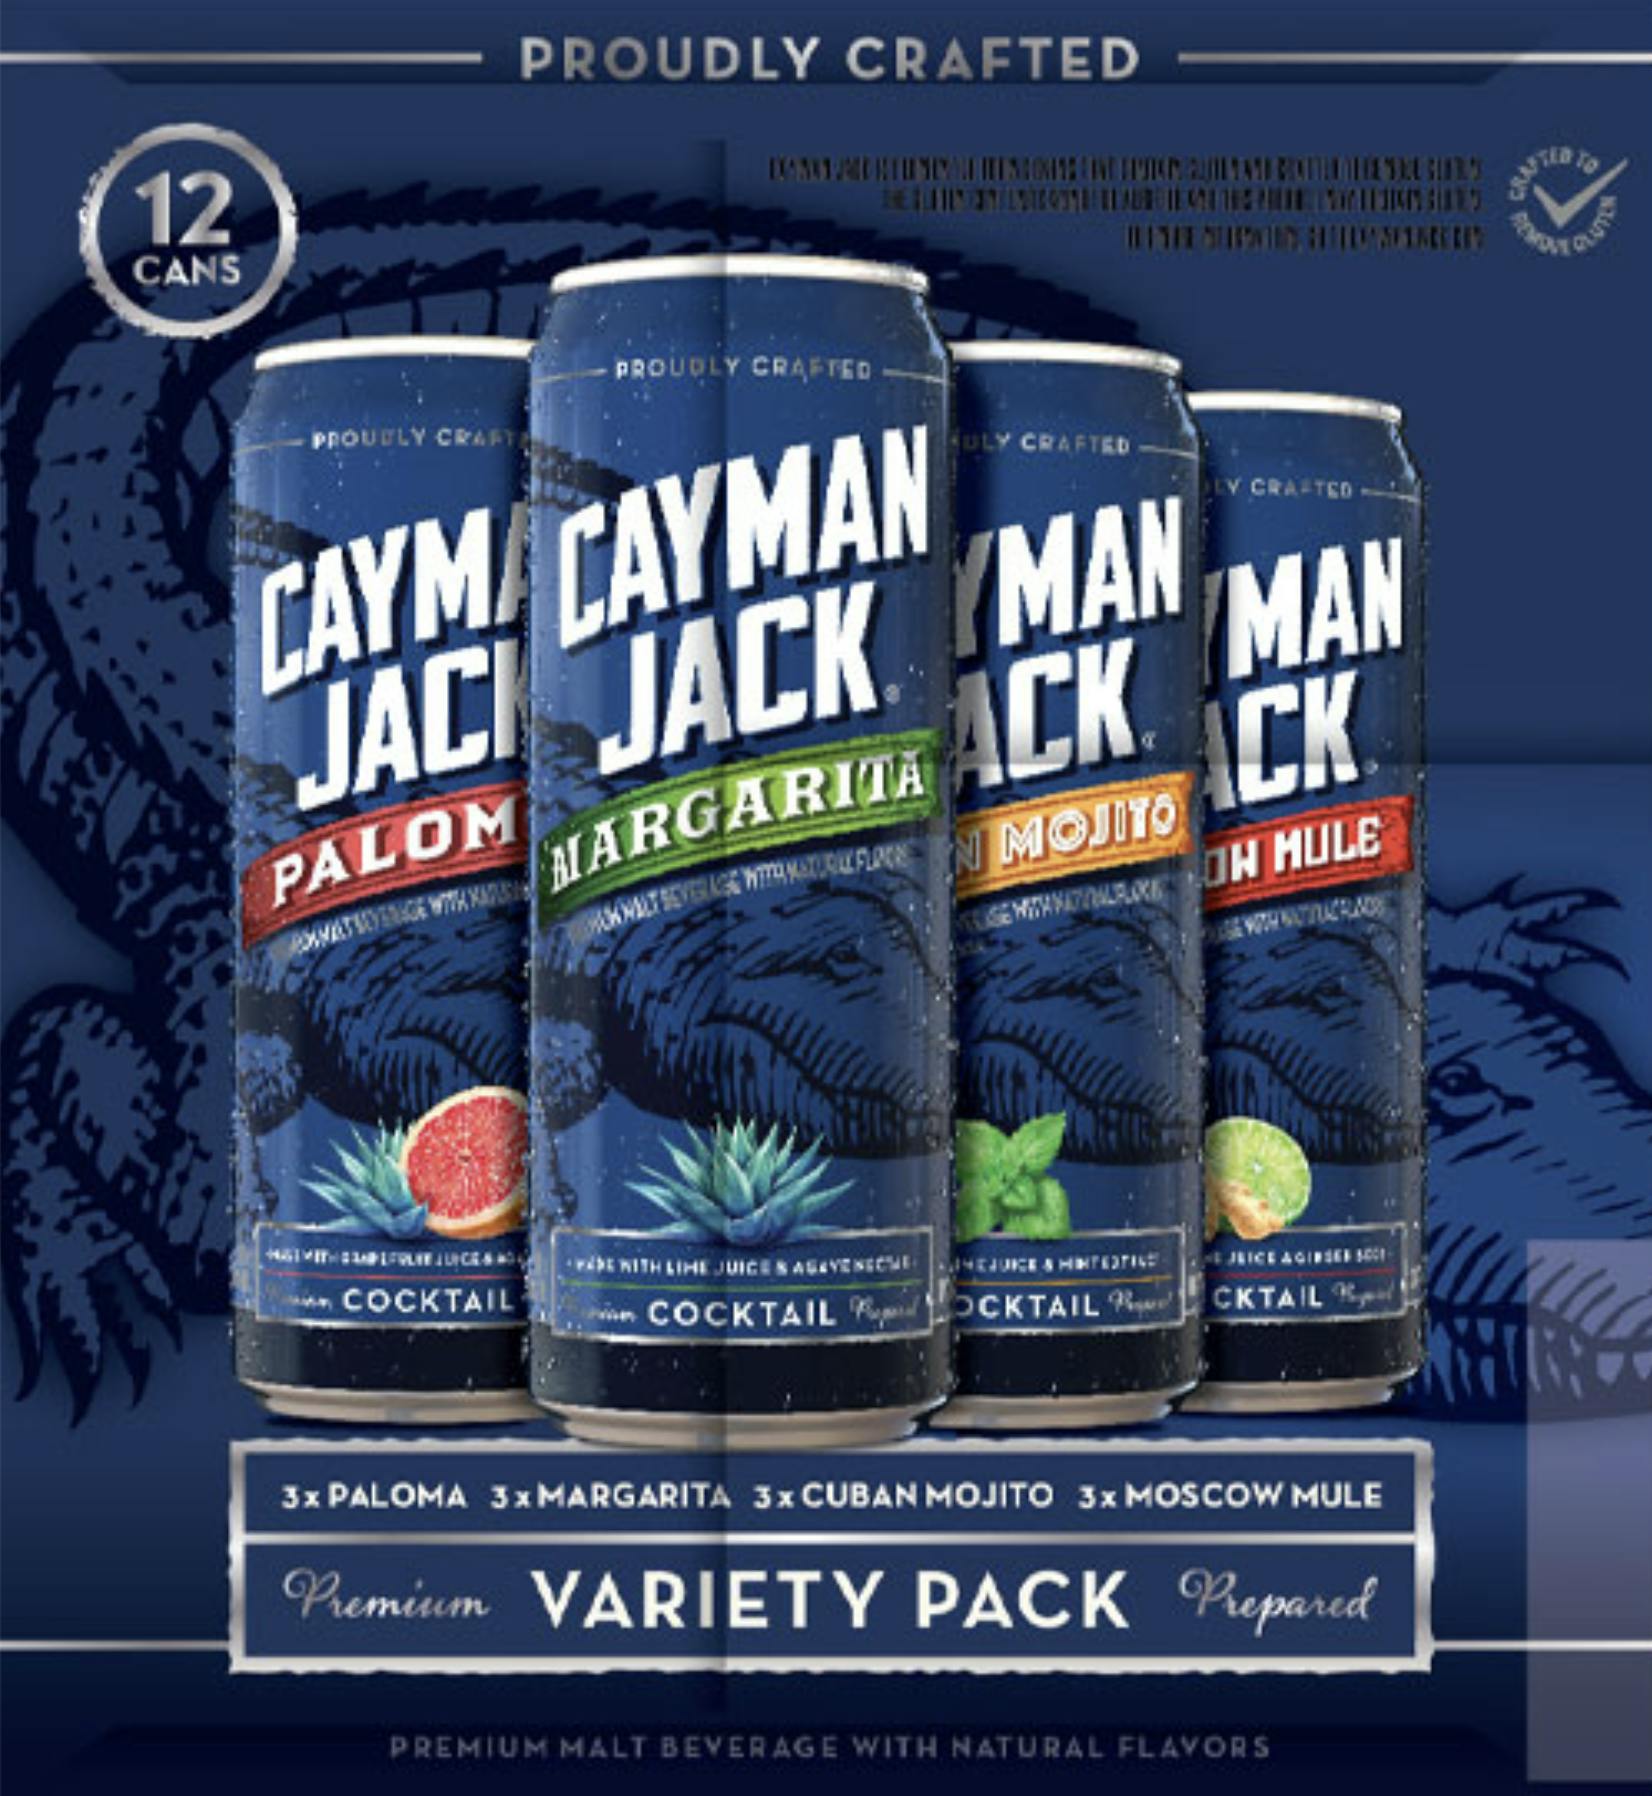 cayman-jack-cocktail-variety-pack-12-oz-can-broadway-liquor